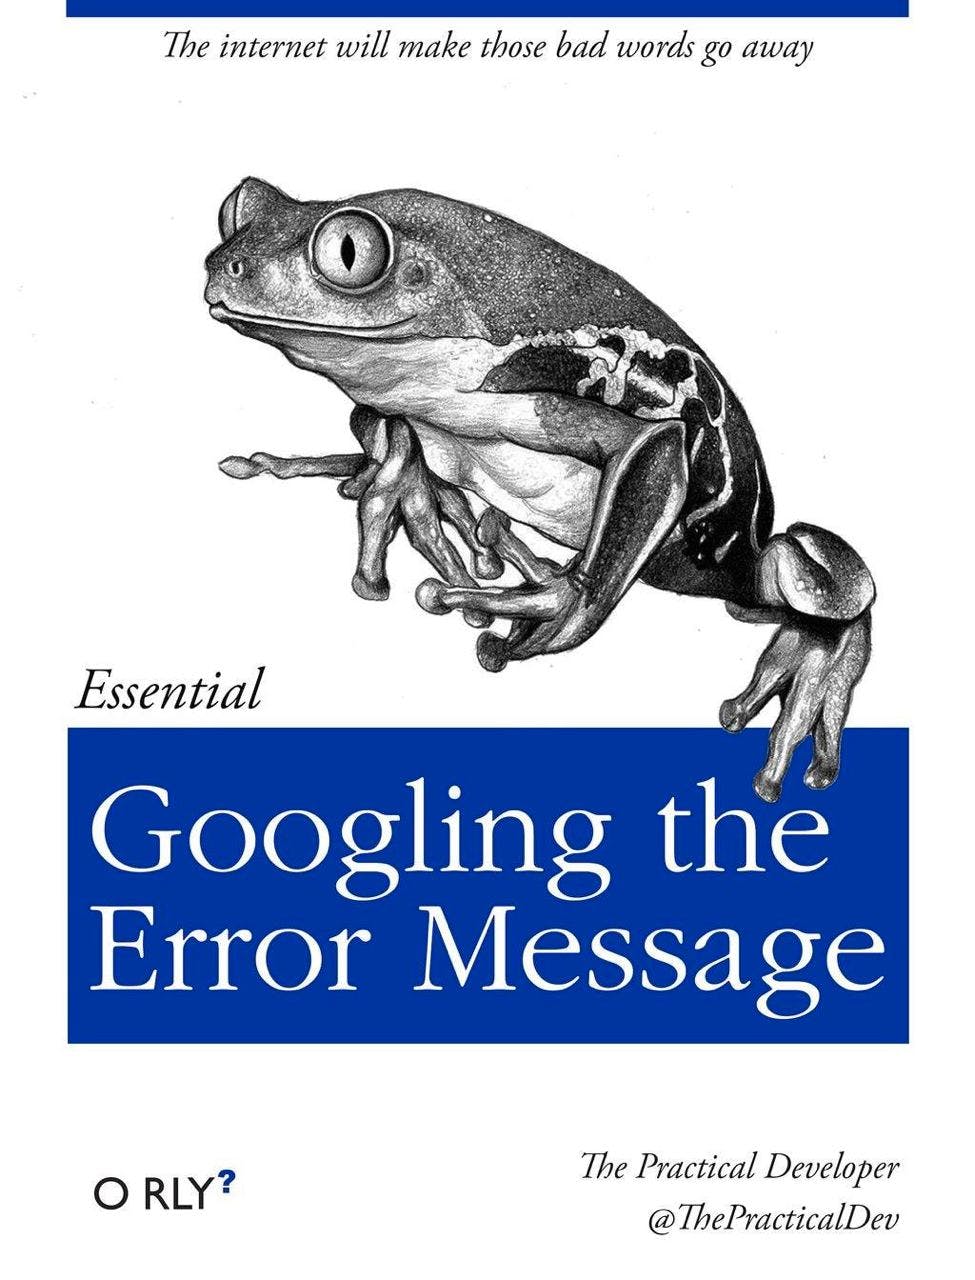 Googling the Error Message | The internet will make those bad words go away